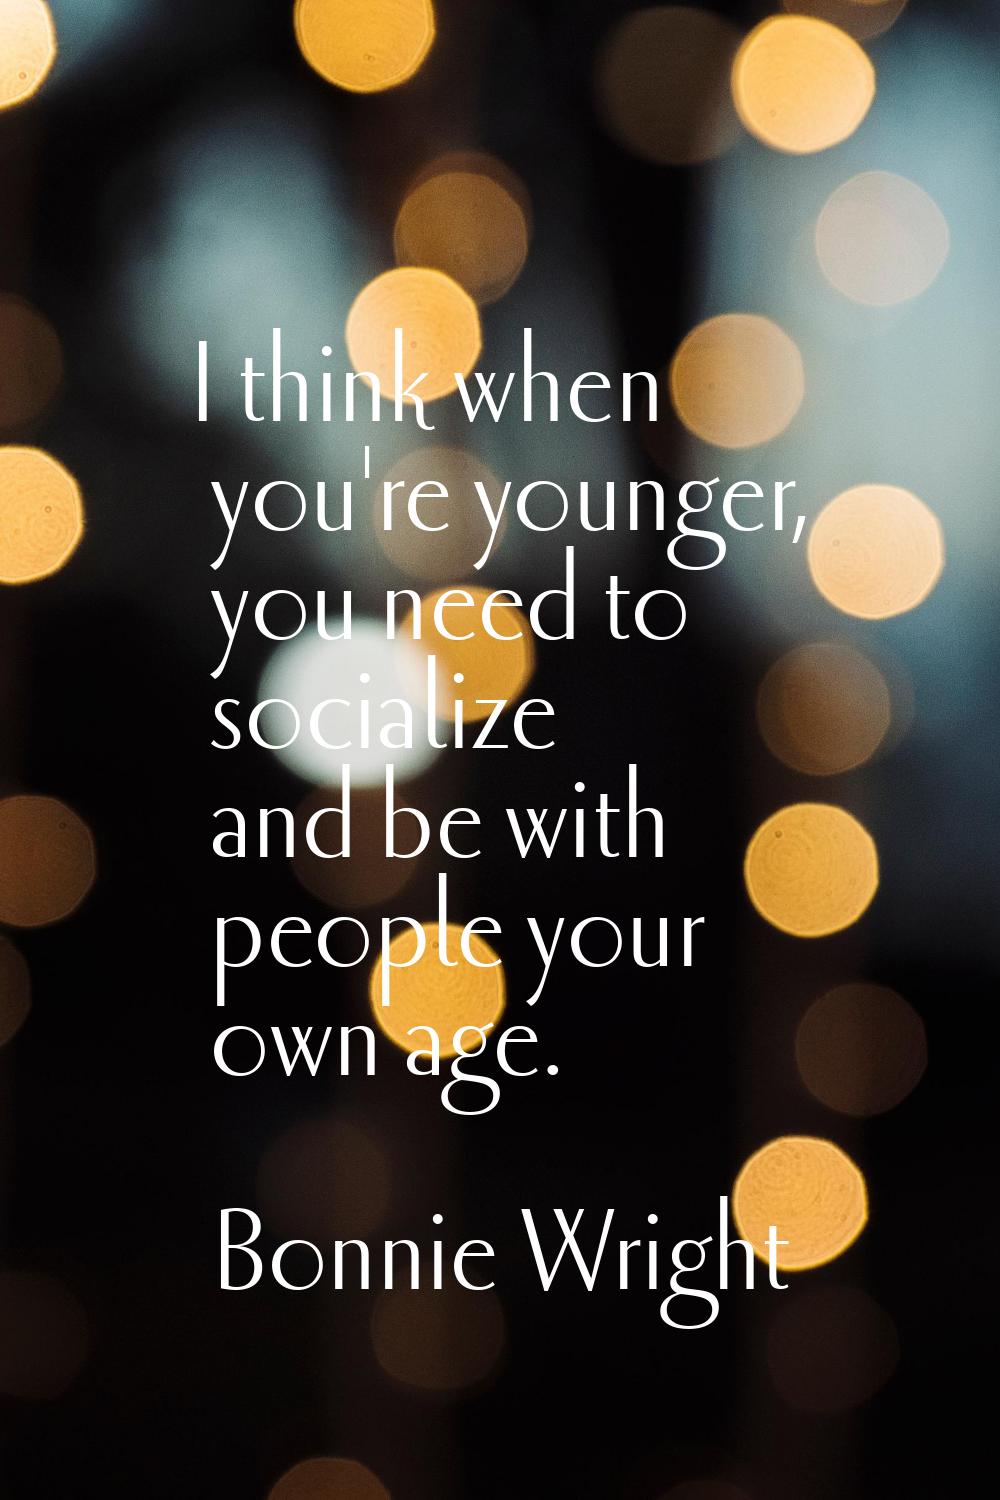 I think when you're younger, you need to socialize and be with people your own age.